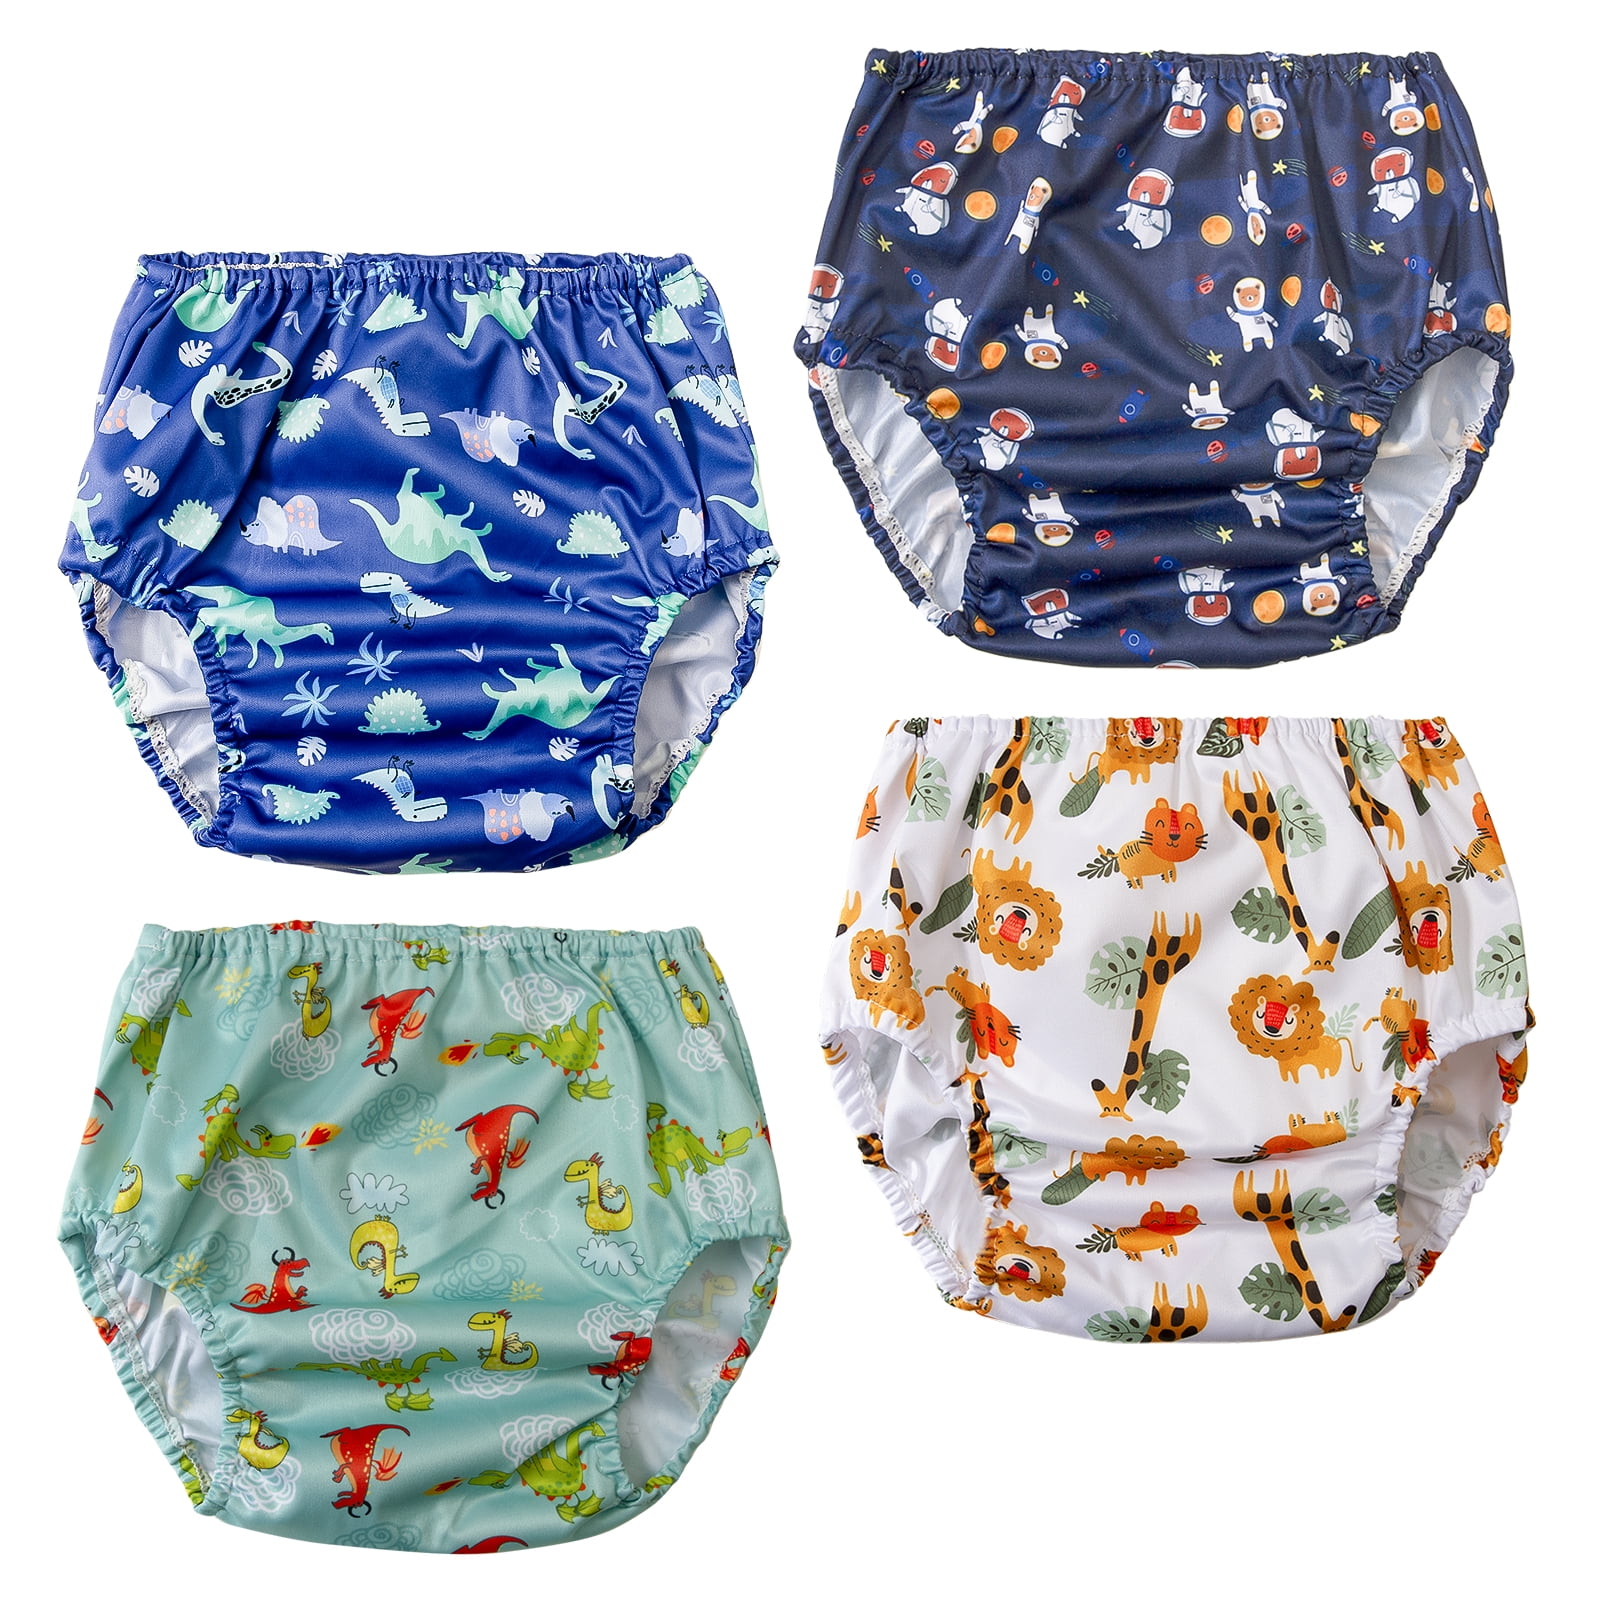 Rubber Training Pants for Toddlers 2T Plastic Underwear Covers for